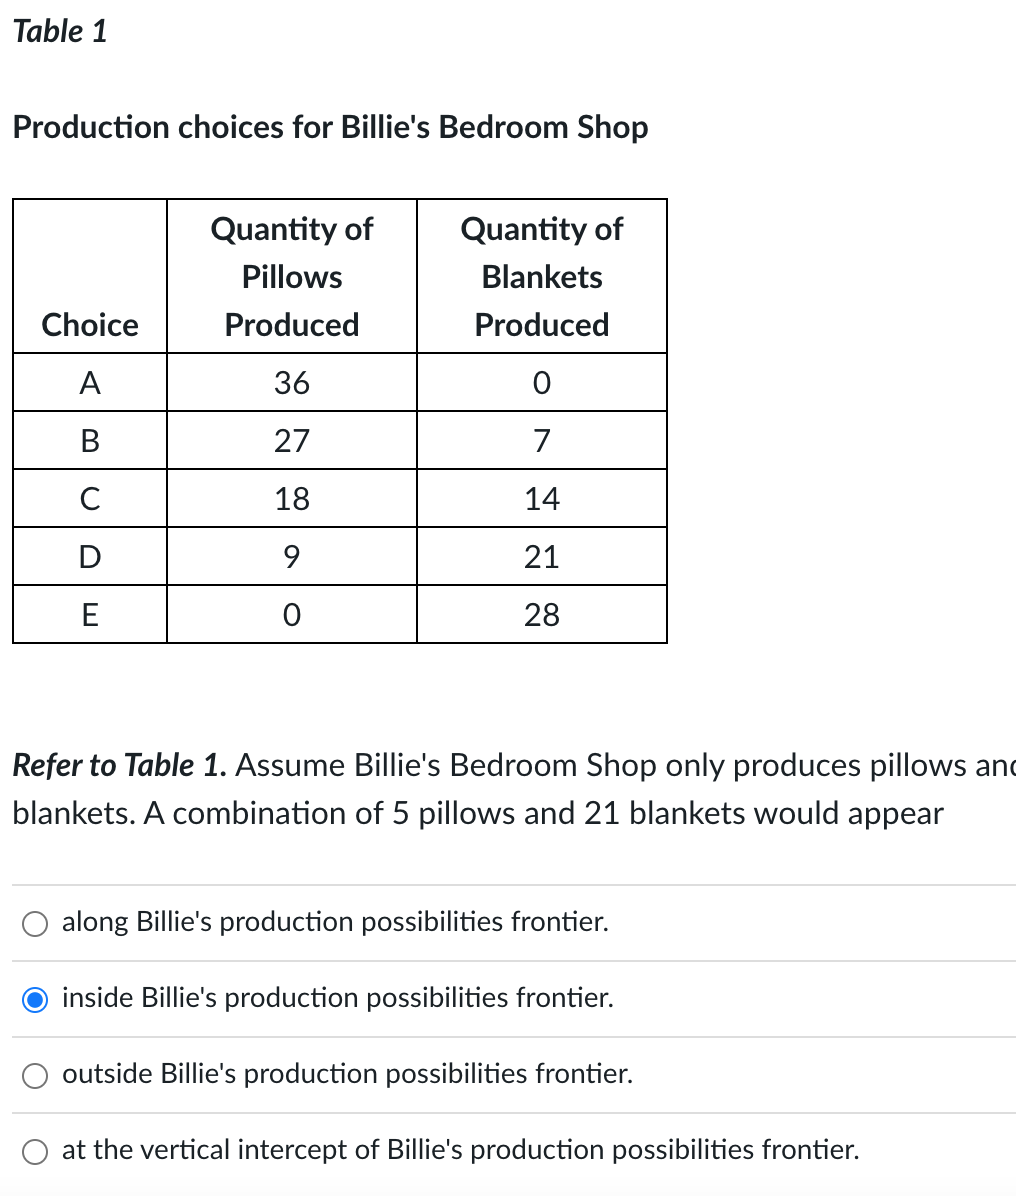 Table 1
Production choices for Billie's Bedroom Shop
Choice
A
B
C
D
E
Quantity of
Pillows
Produced
36
27
18
9
0
Quantity of
Blankets
Produced
0
7
14
21
28
Refer to Table 1. Assume Billie's Bedroom Shop only produces pillows and
blankets. A combination of 5 pillows and 21 blankets would appear
along Billie's production possibilities frontier.
inside Billie's production possibilities frontier.
outside Billie's production possibilities frontier.
at the vertical intercept of Billie's production possibilities frontier.